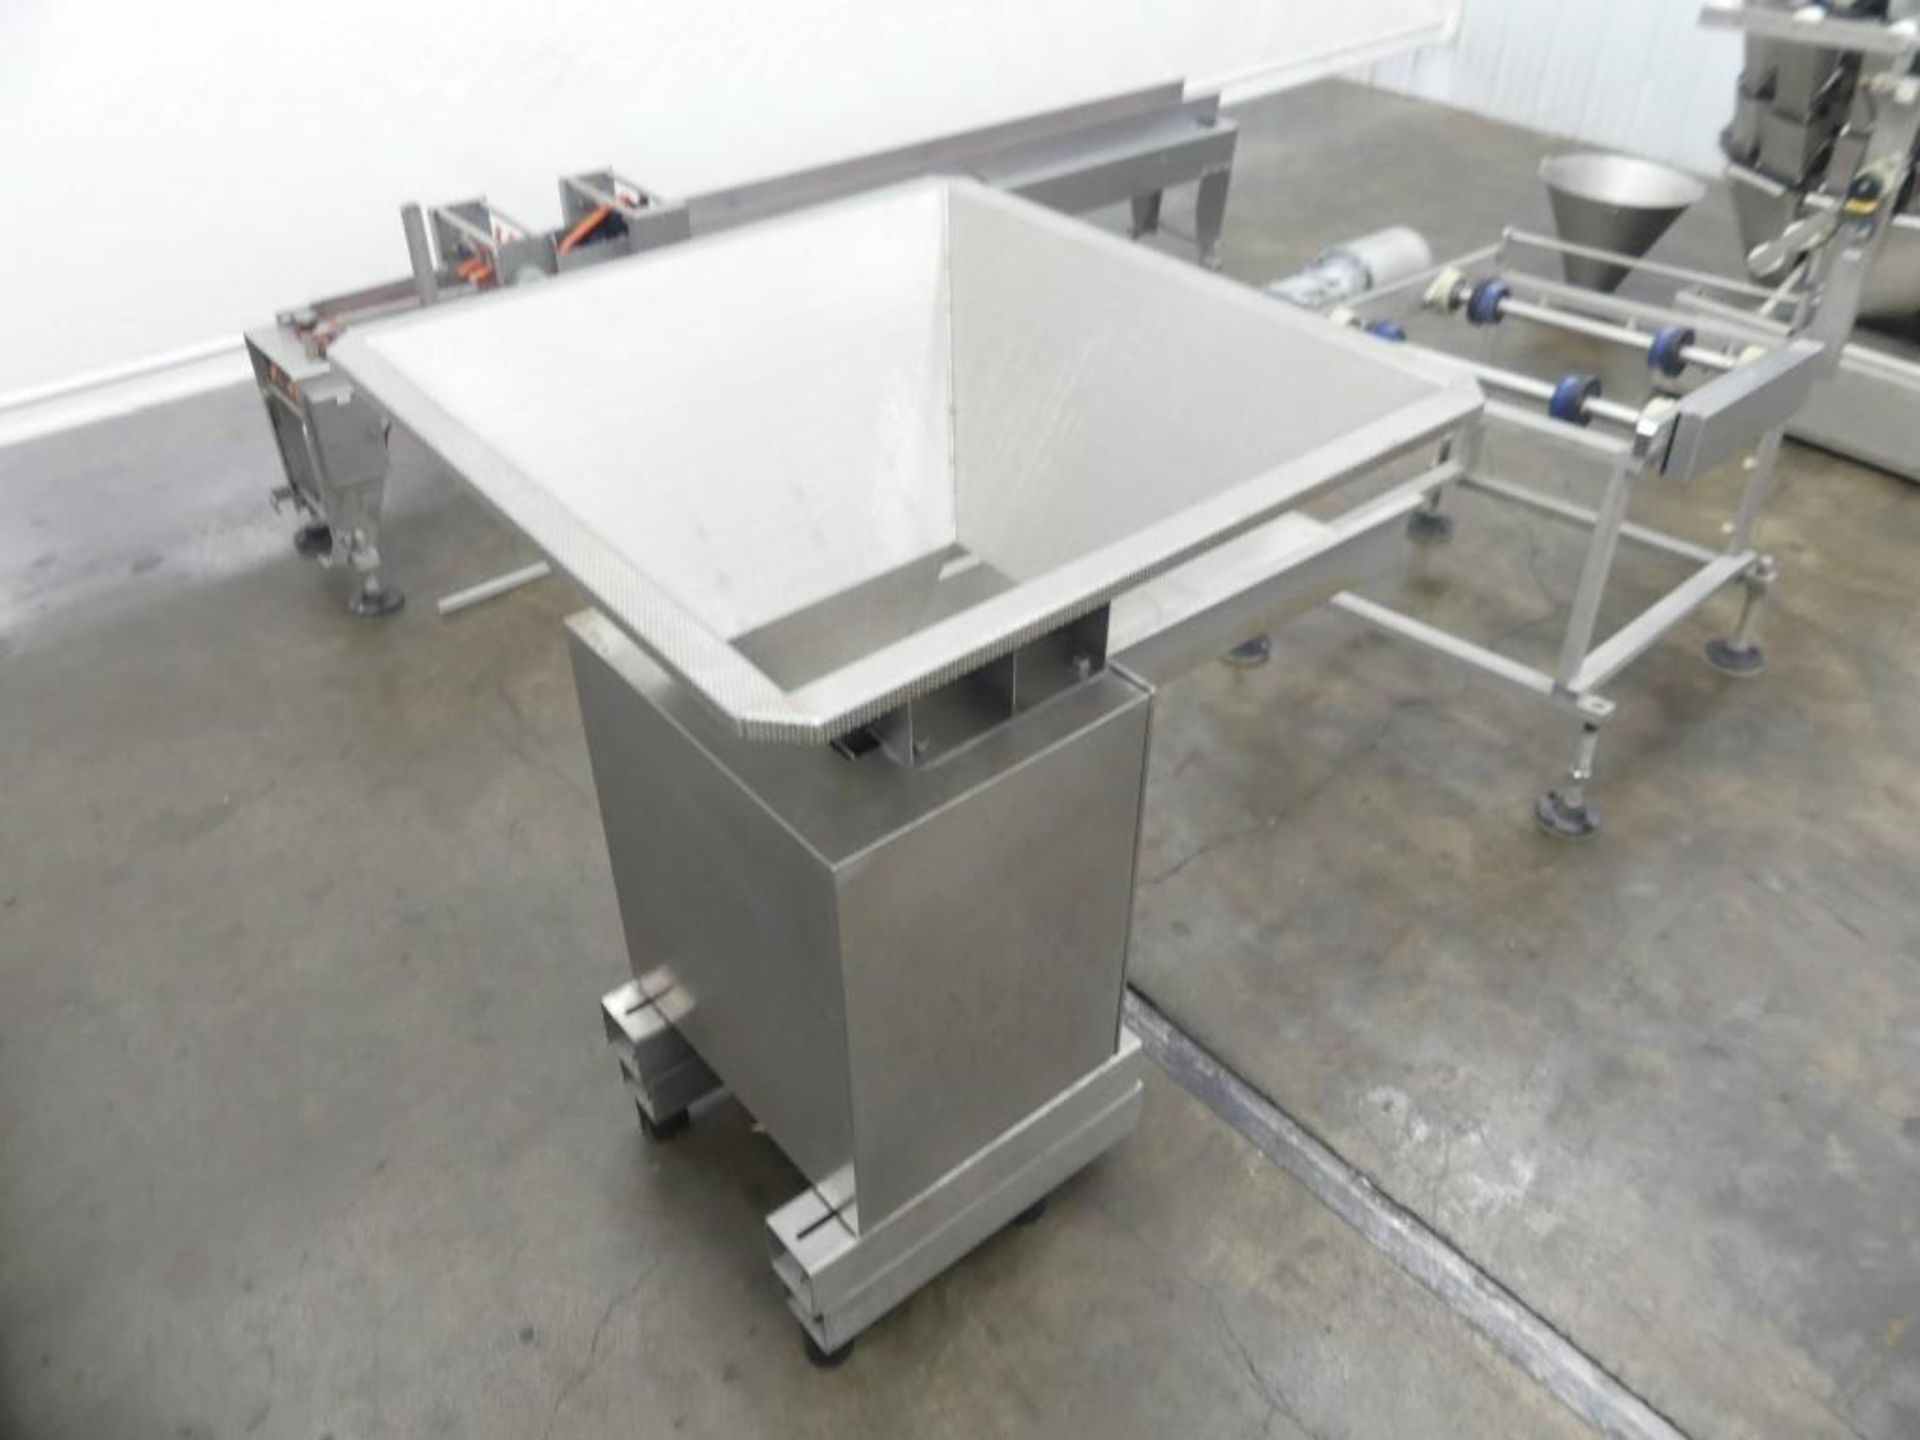 Massman HFFS-IM1000 Flexible Pouch Packaging System - Image 66 of 127